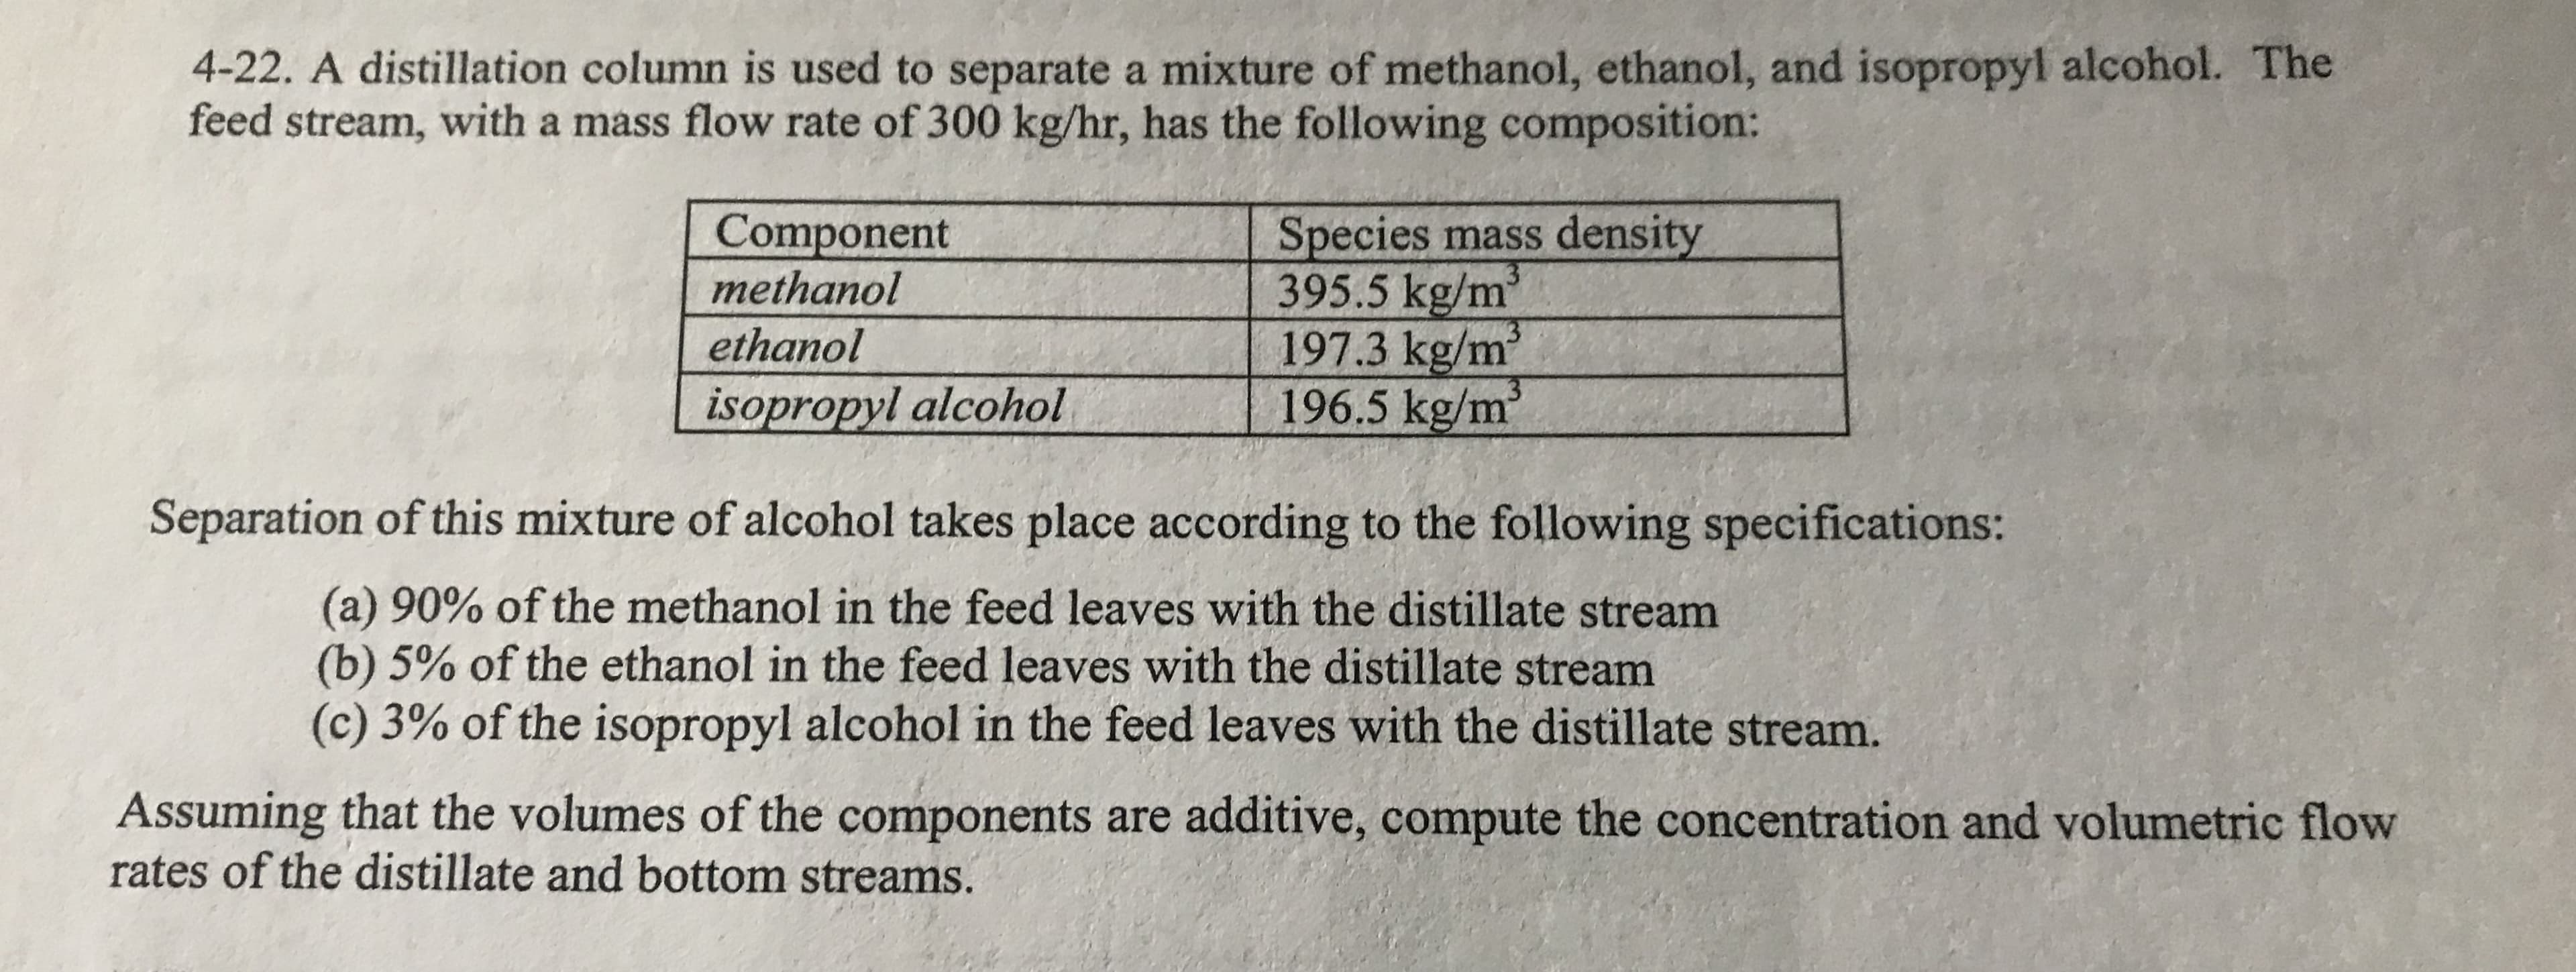 4-22. A distillation column is used to separate a mixture of methanol, ethanol, and isopropyl alcohol. The
feed stream, with a mass flow rate of 300 kg/hr, has the following composition:
Component
methanol
Species mass density
3
395.5 kg/m
3
197.3 kg/m
ethanol
13
196.5 kg/m
isopropyl alcohol
Separation of this mixture of alcohol takes place according to the following specifications:
(a) 90% of the methanol in the feed leaves with the distillate stream
(b) 5% of the ethanol in the feed leaves with the distillate stream
(c) 3% of the isopropyl alcohol in the feed leaves with the distillate stream.
Assuming that the volumes of the components are additive, compute the concentration and volumetric flow
rates of the distillate and bottom streams
